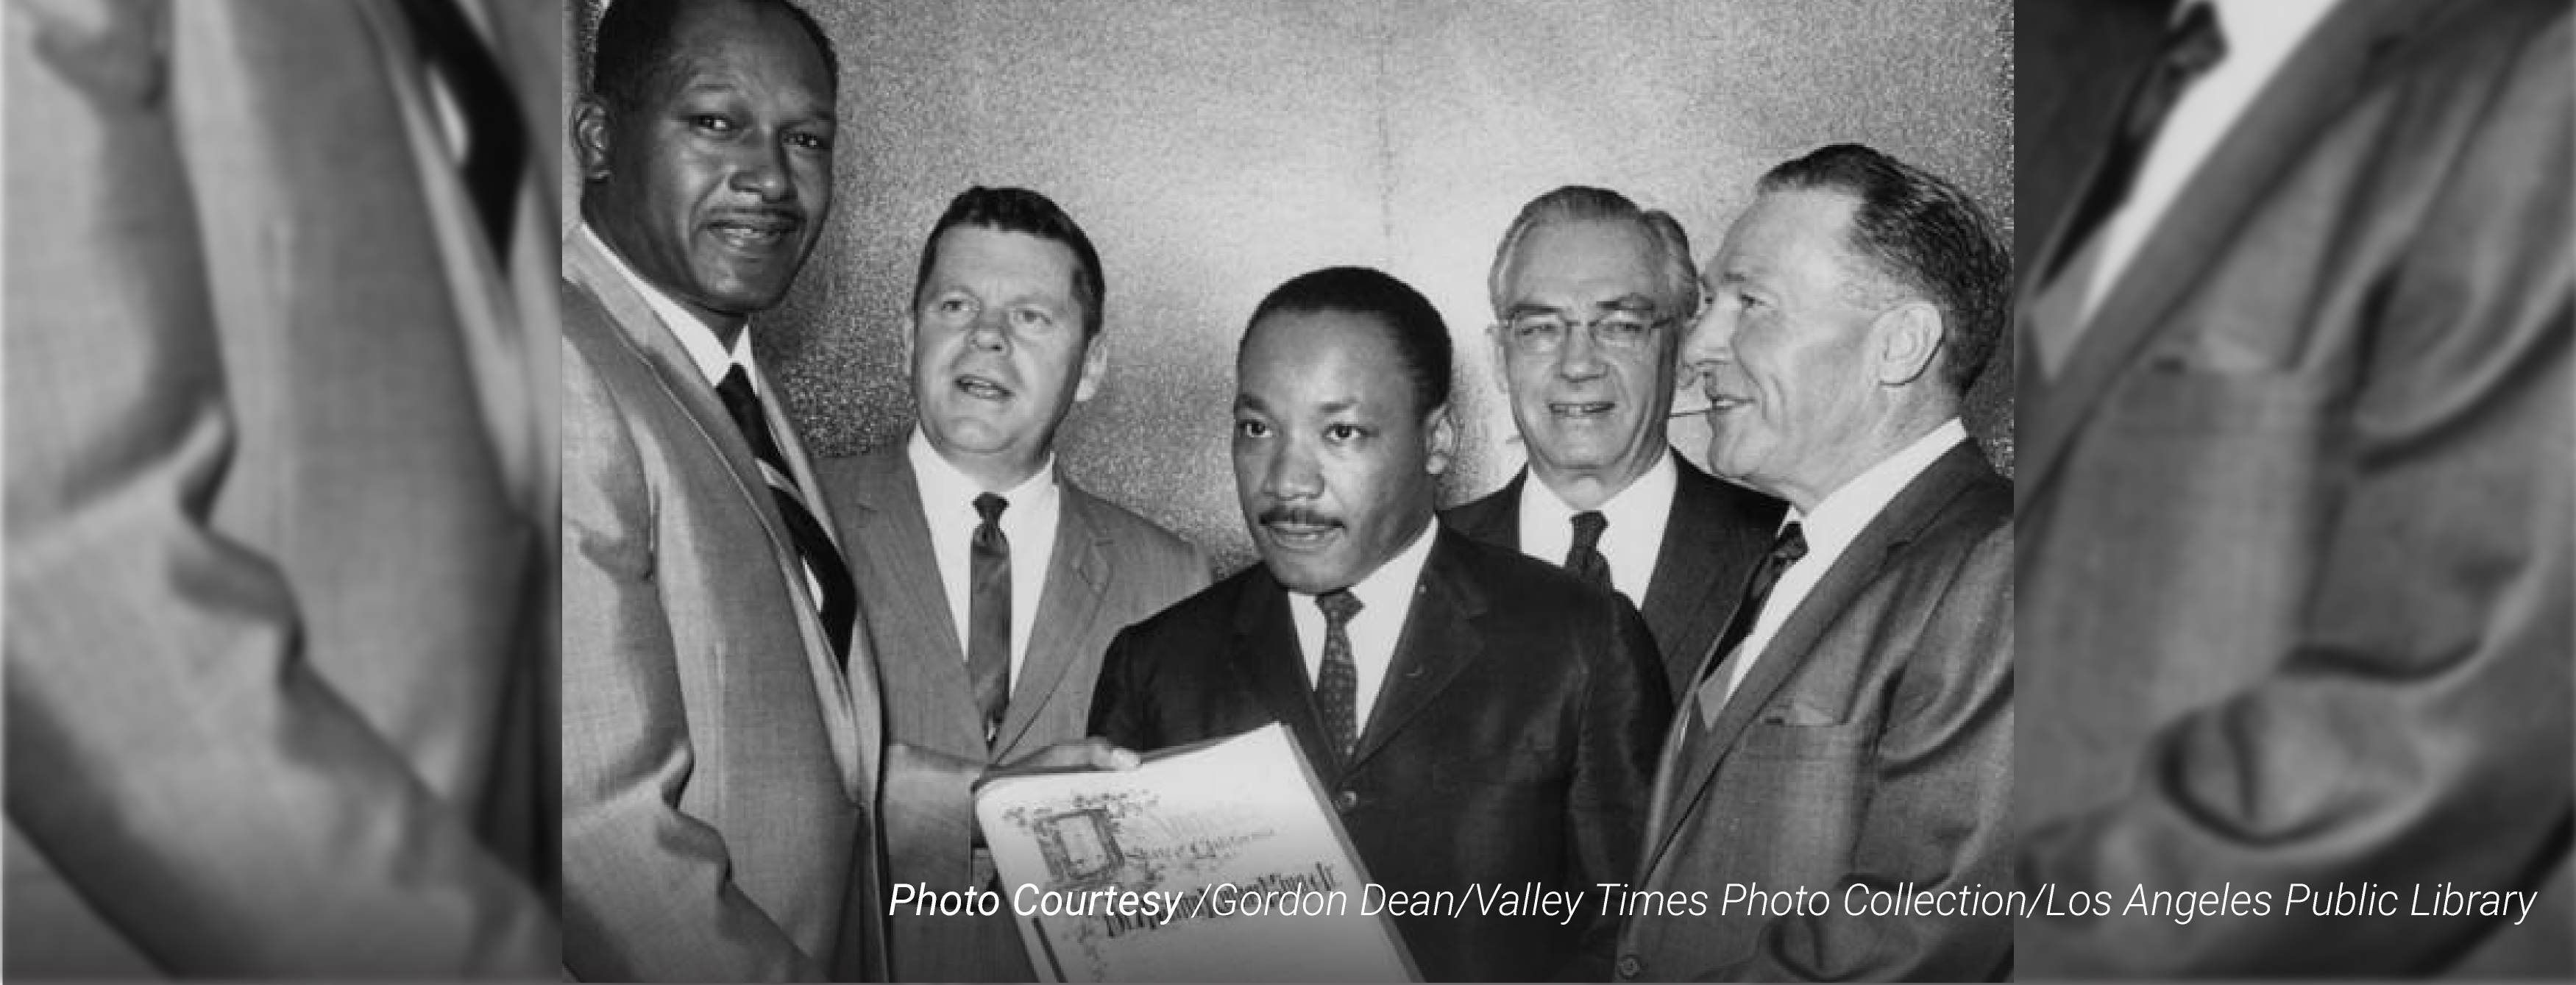 Martin Luther King is honored by the City of Los Angeles and the World Affairs Council at the Hollywood Palladium February 26, 1965.